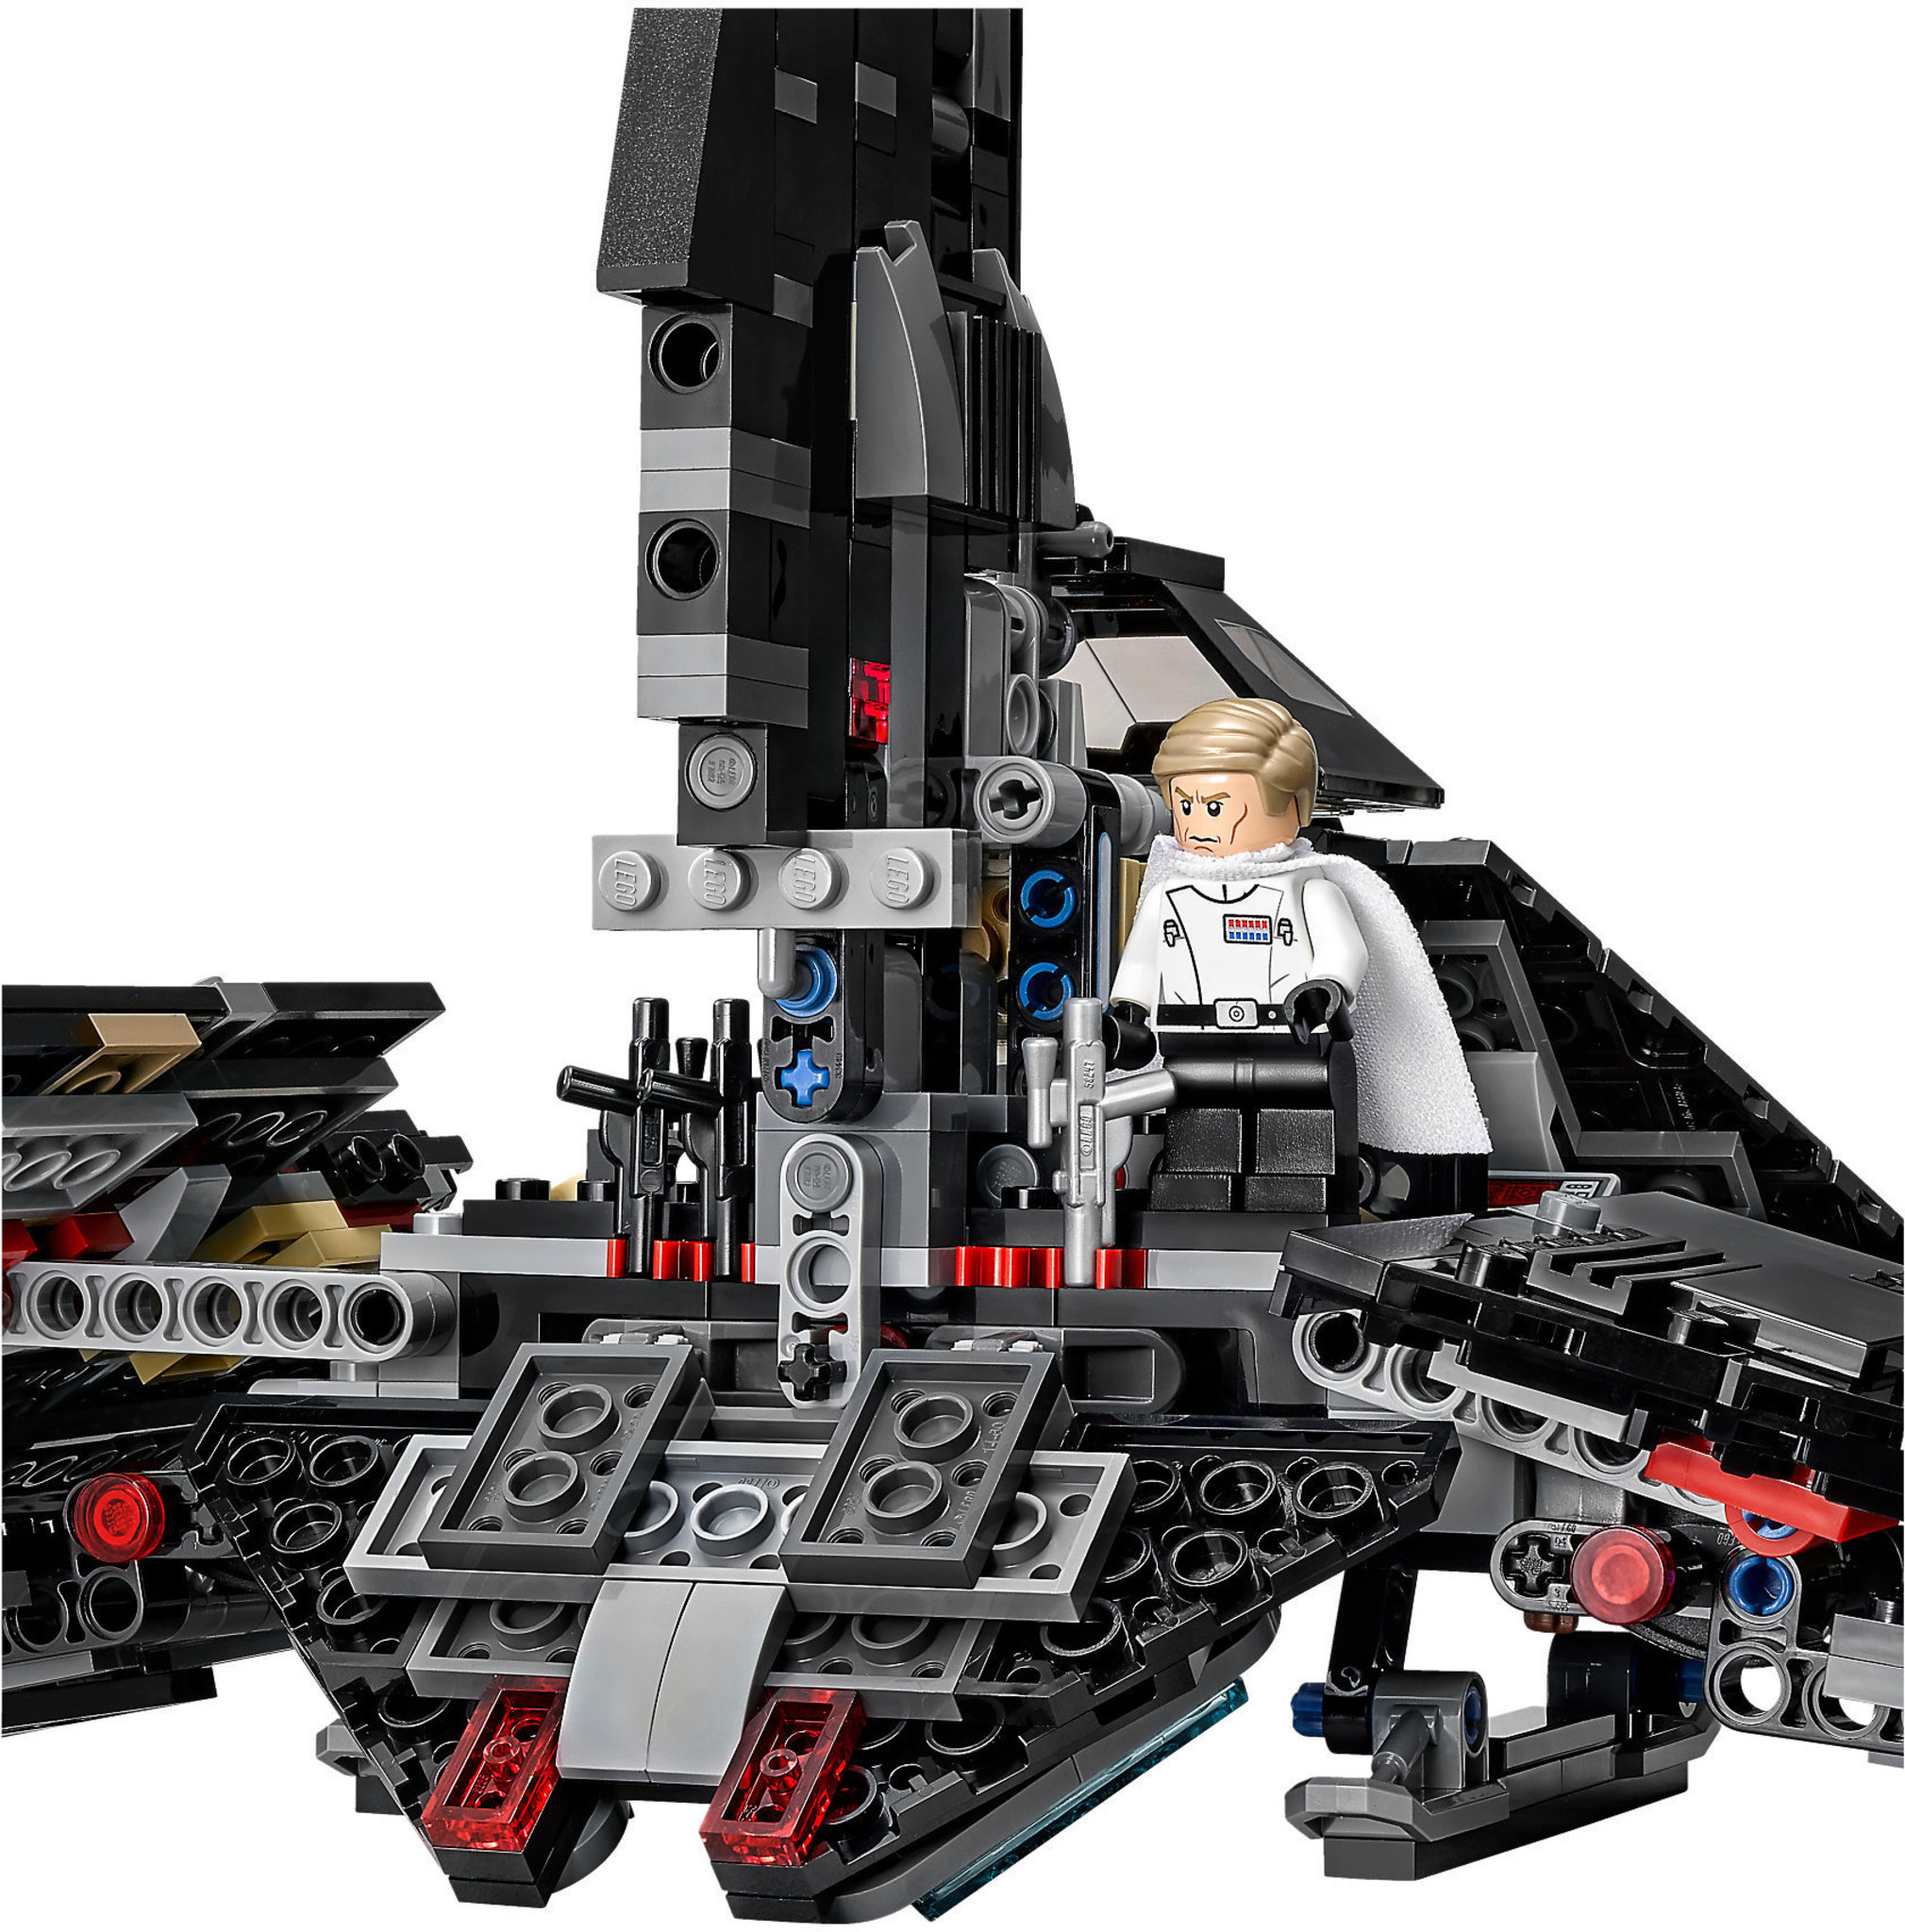 LEGO® Star Wars™ Rogue One 75156 Krennic's Imperial Shuttle